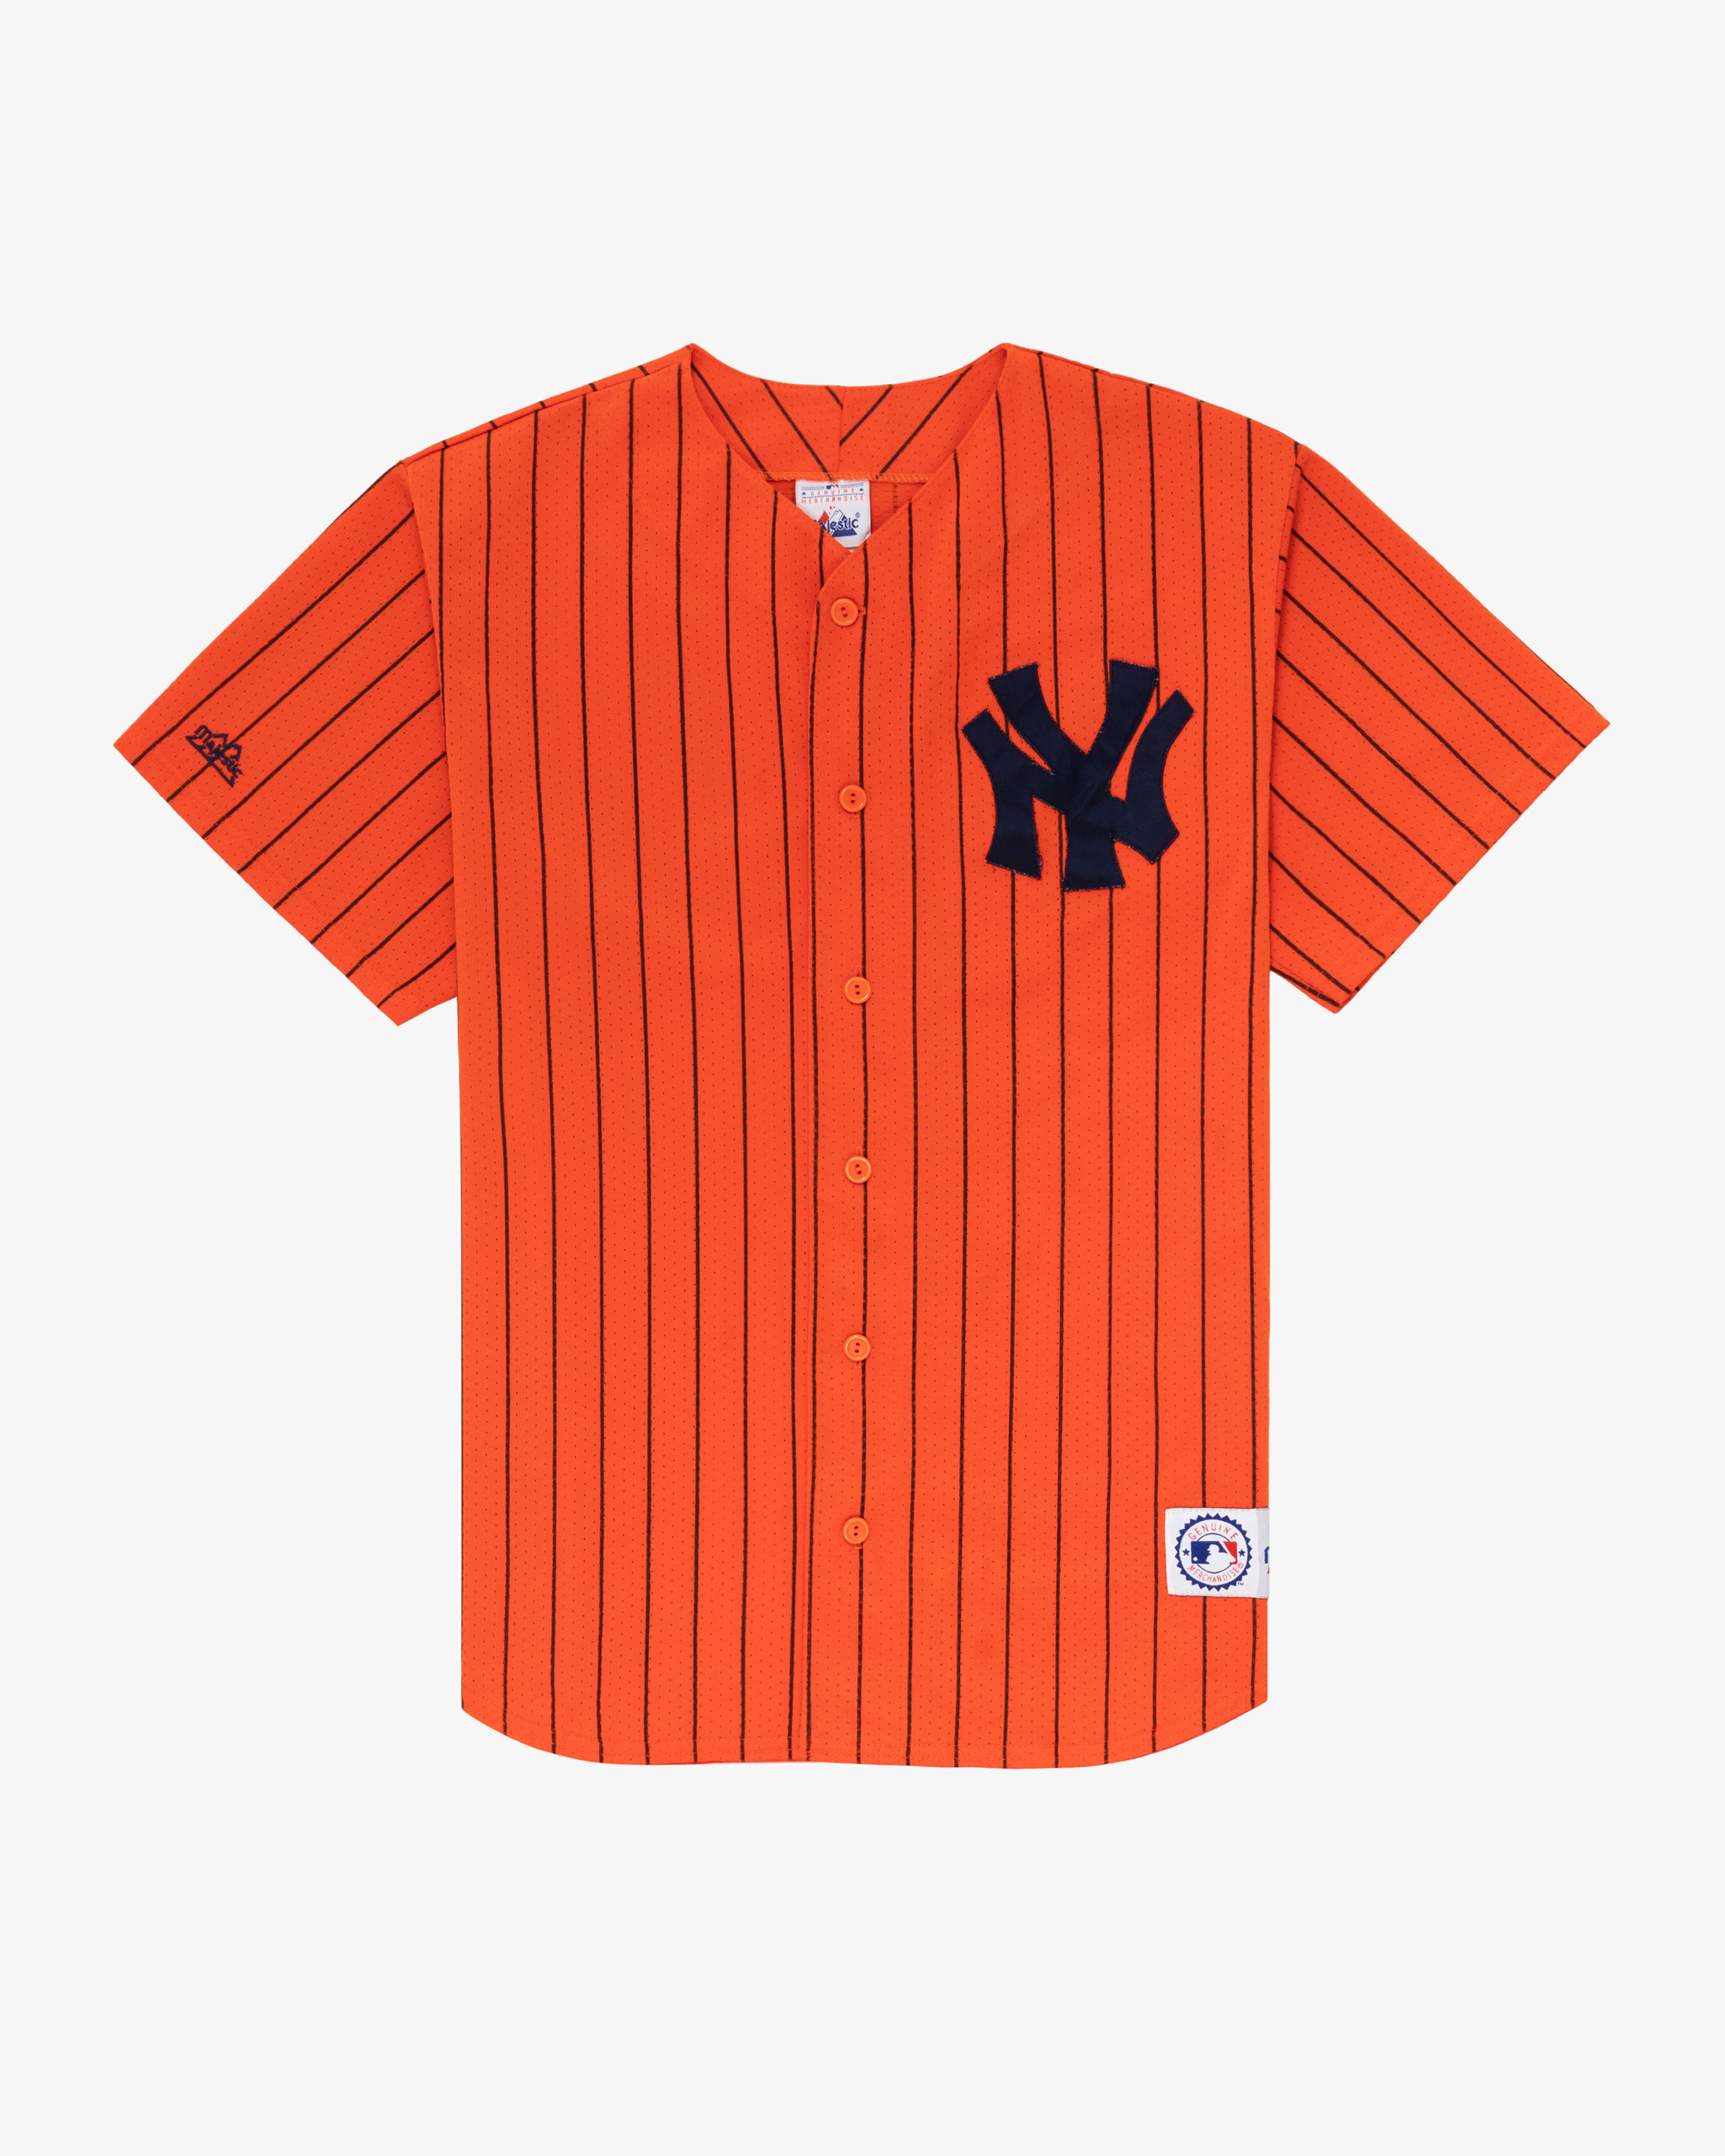 mlb yankees jersey for women